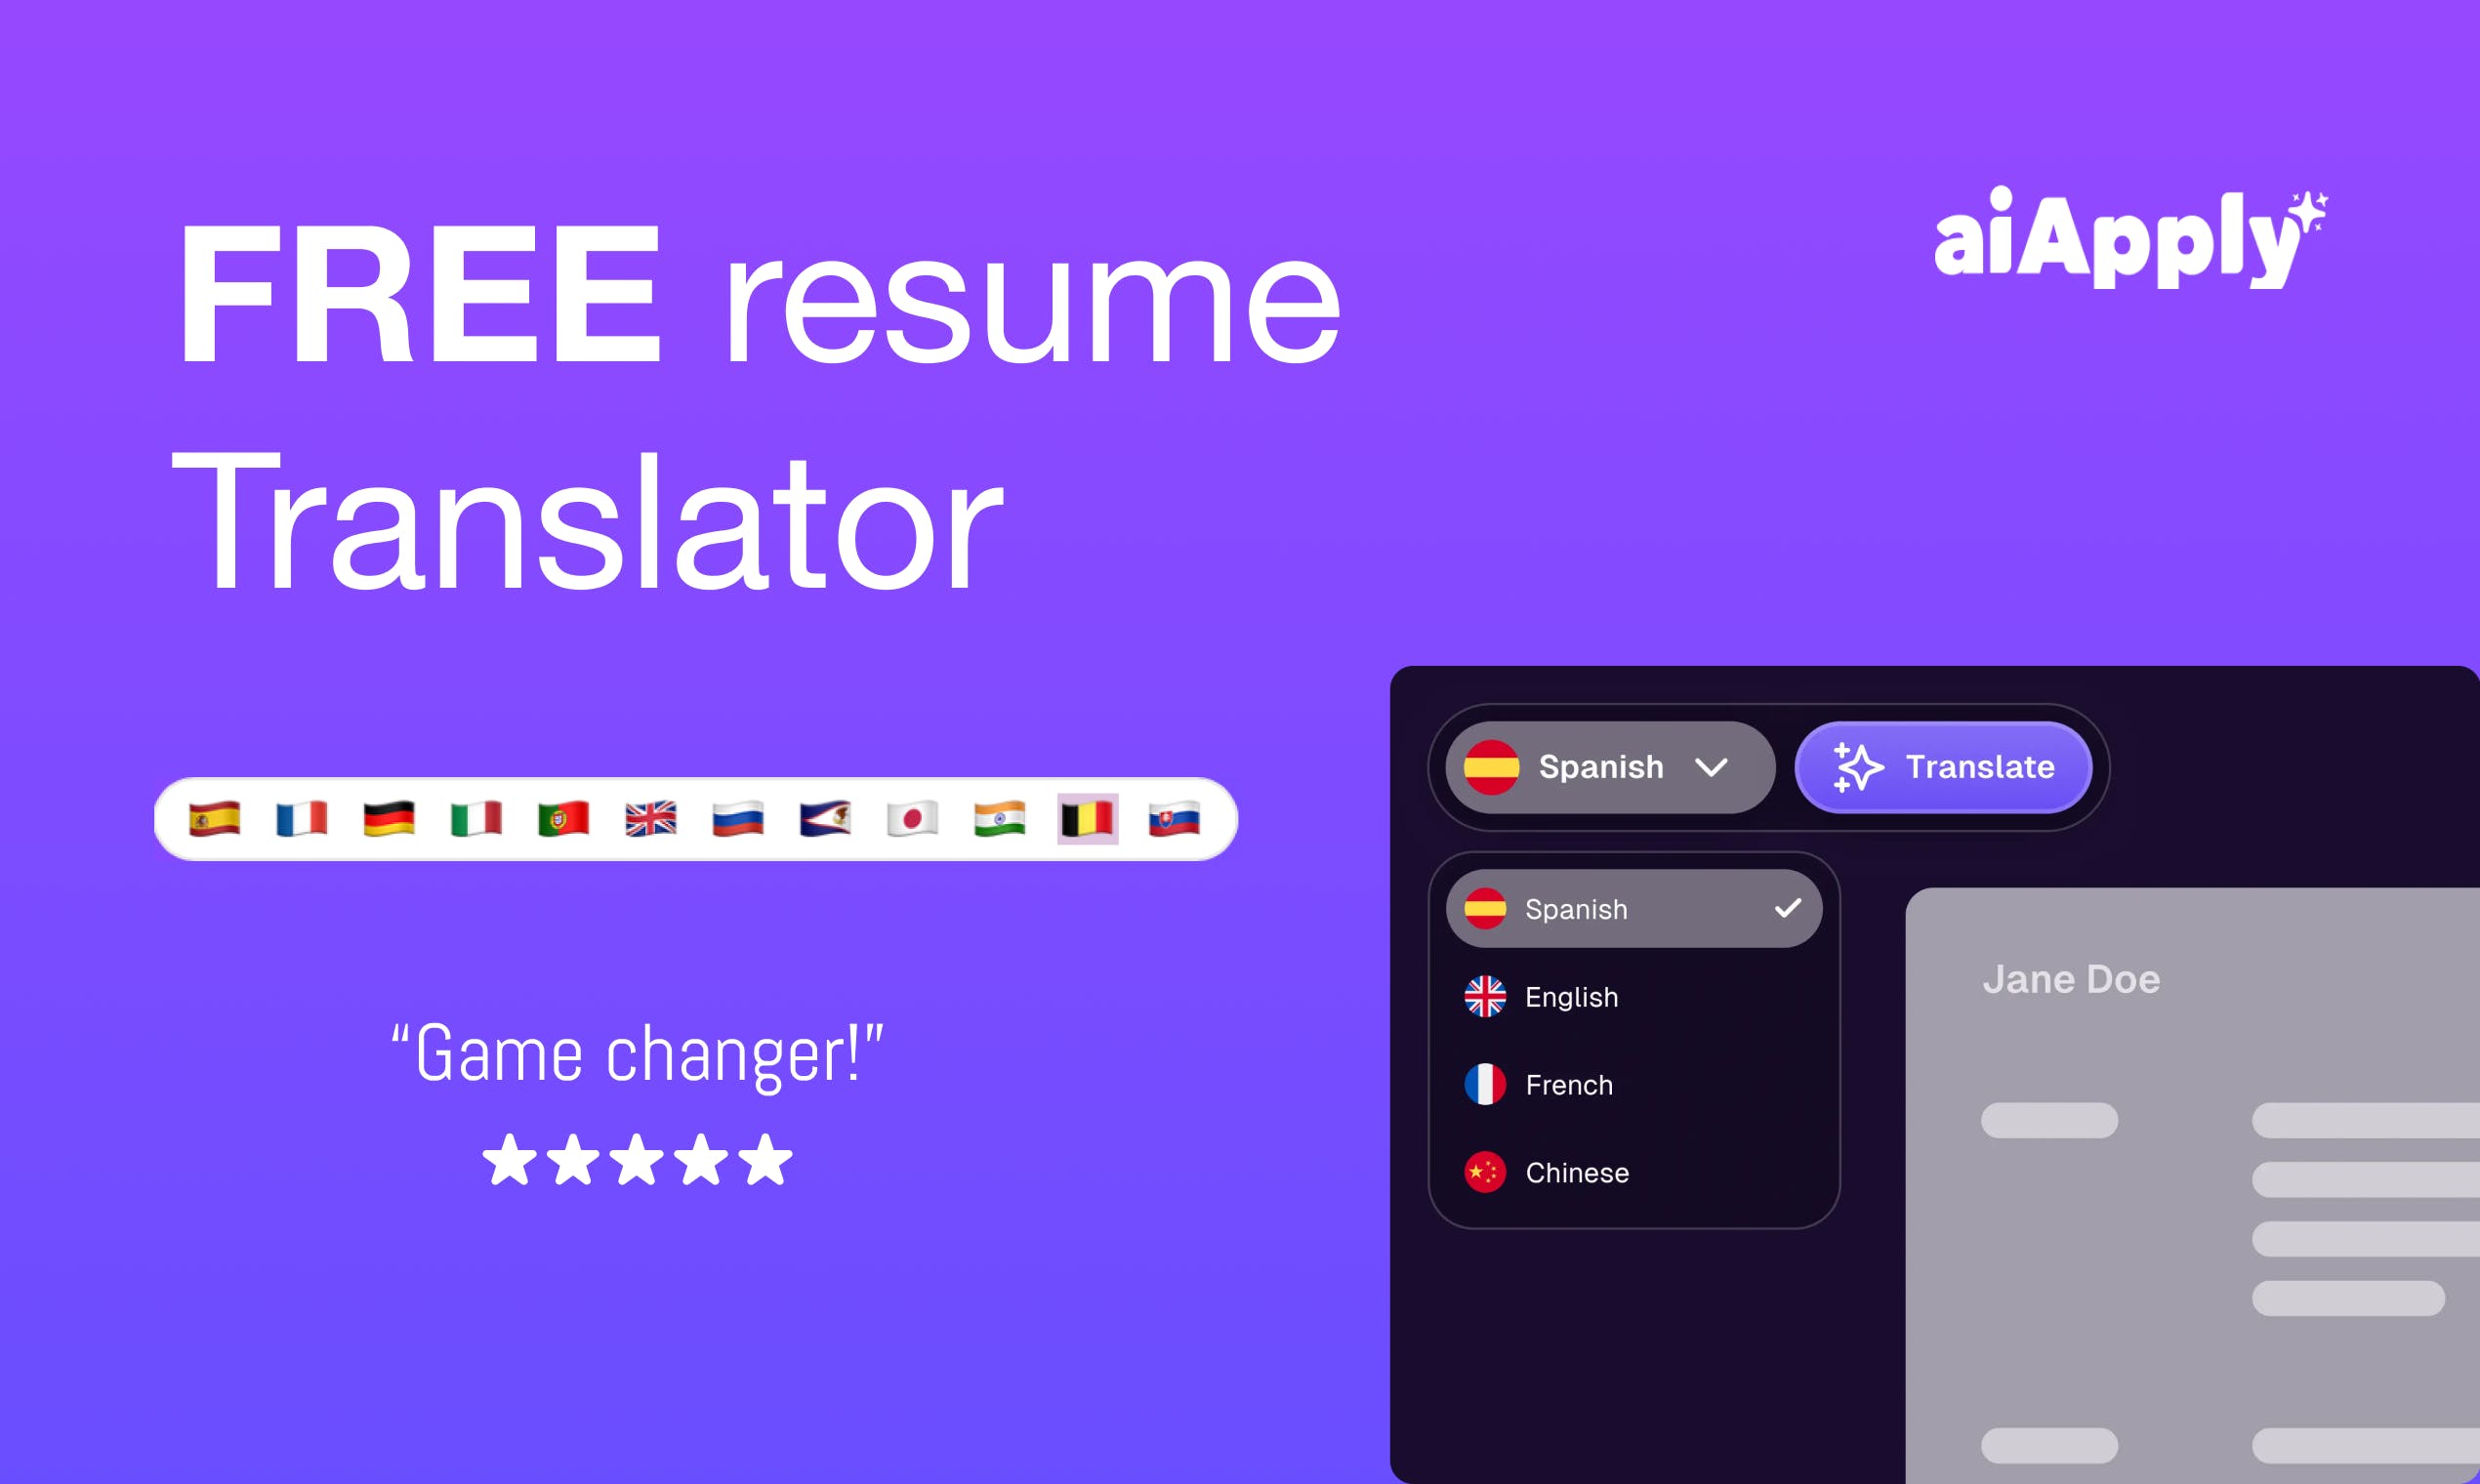 Translate Your Resume For Free! media 1